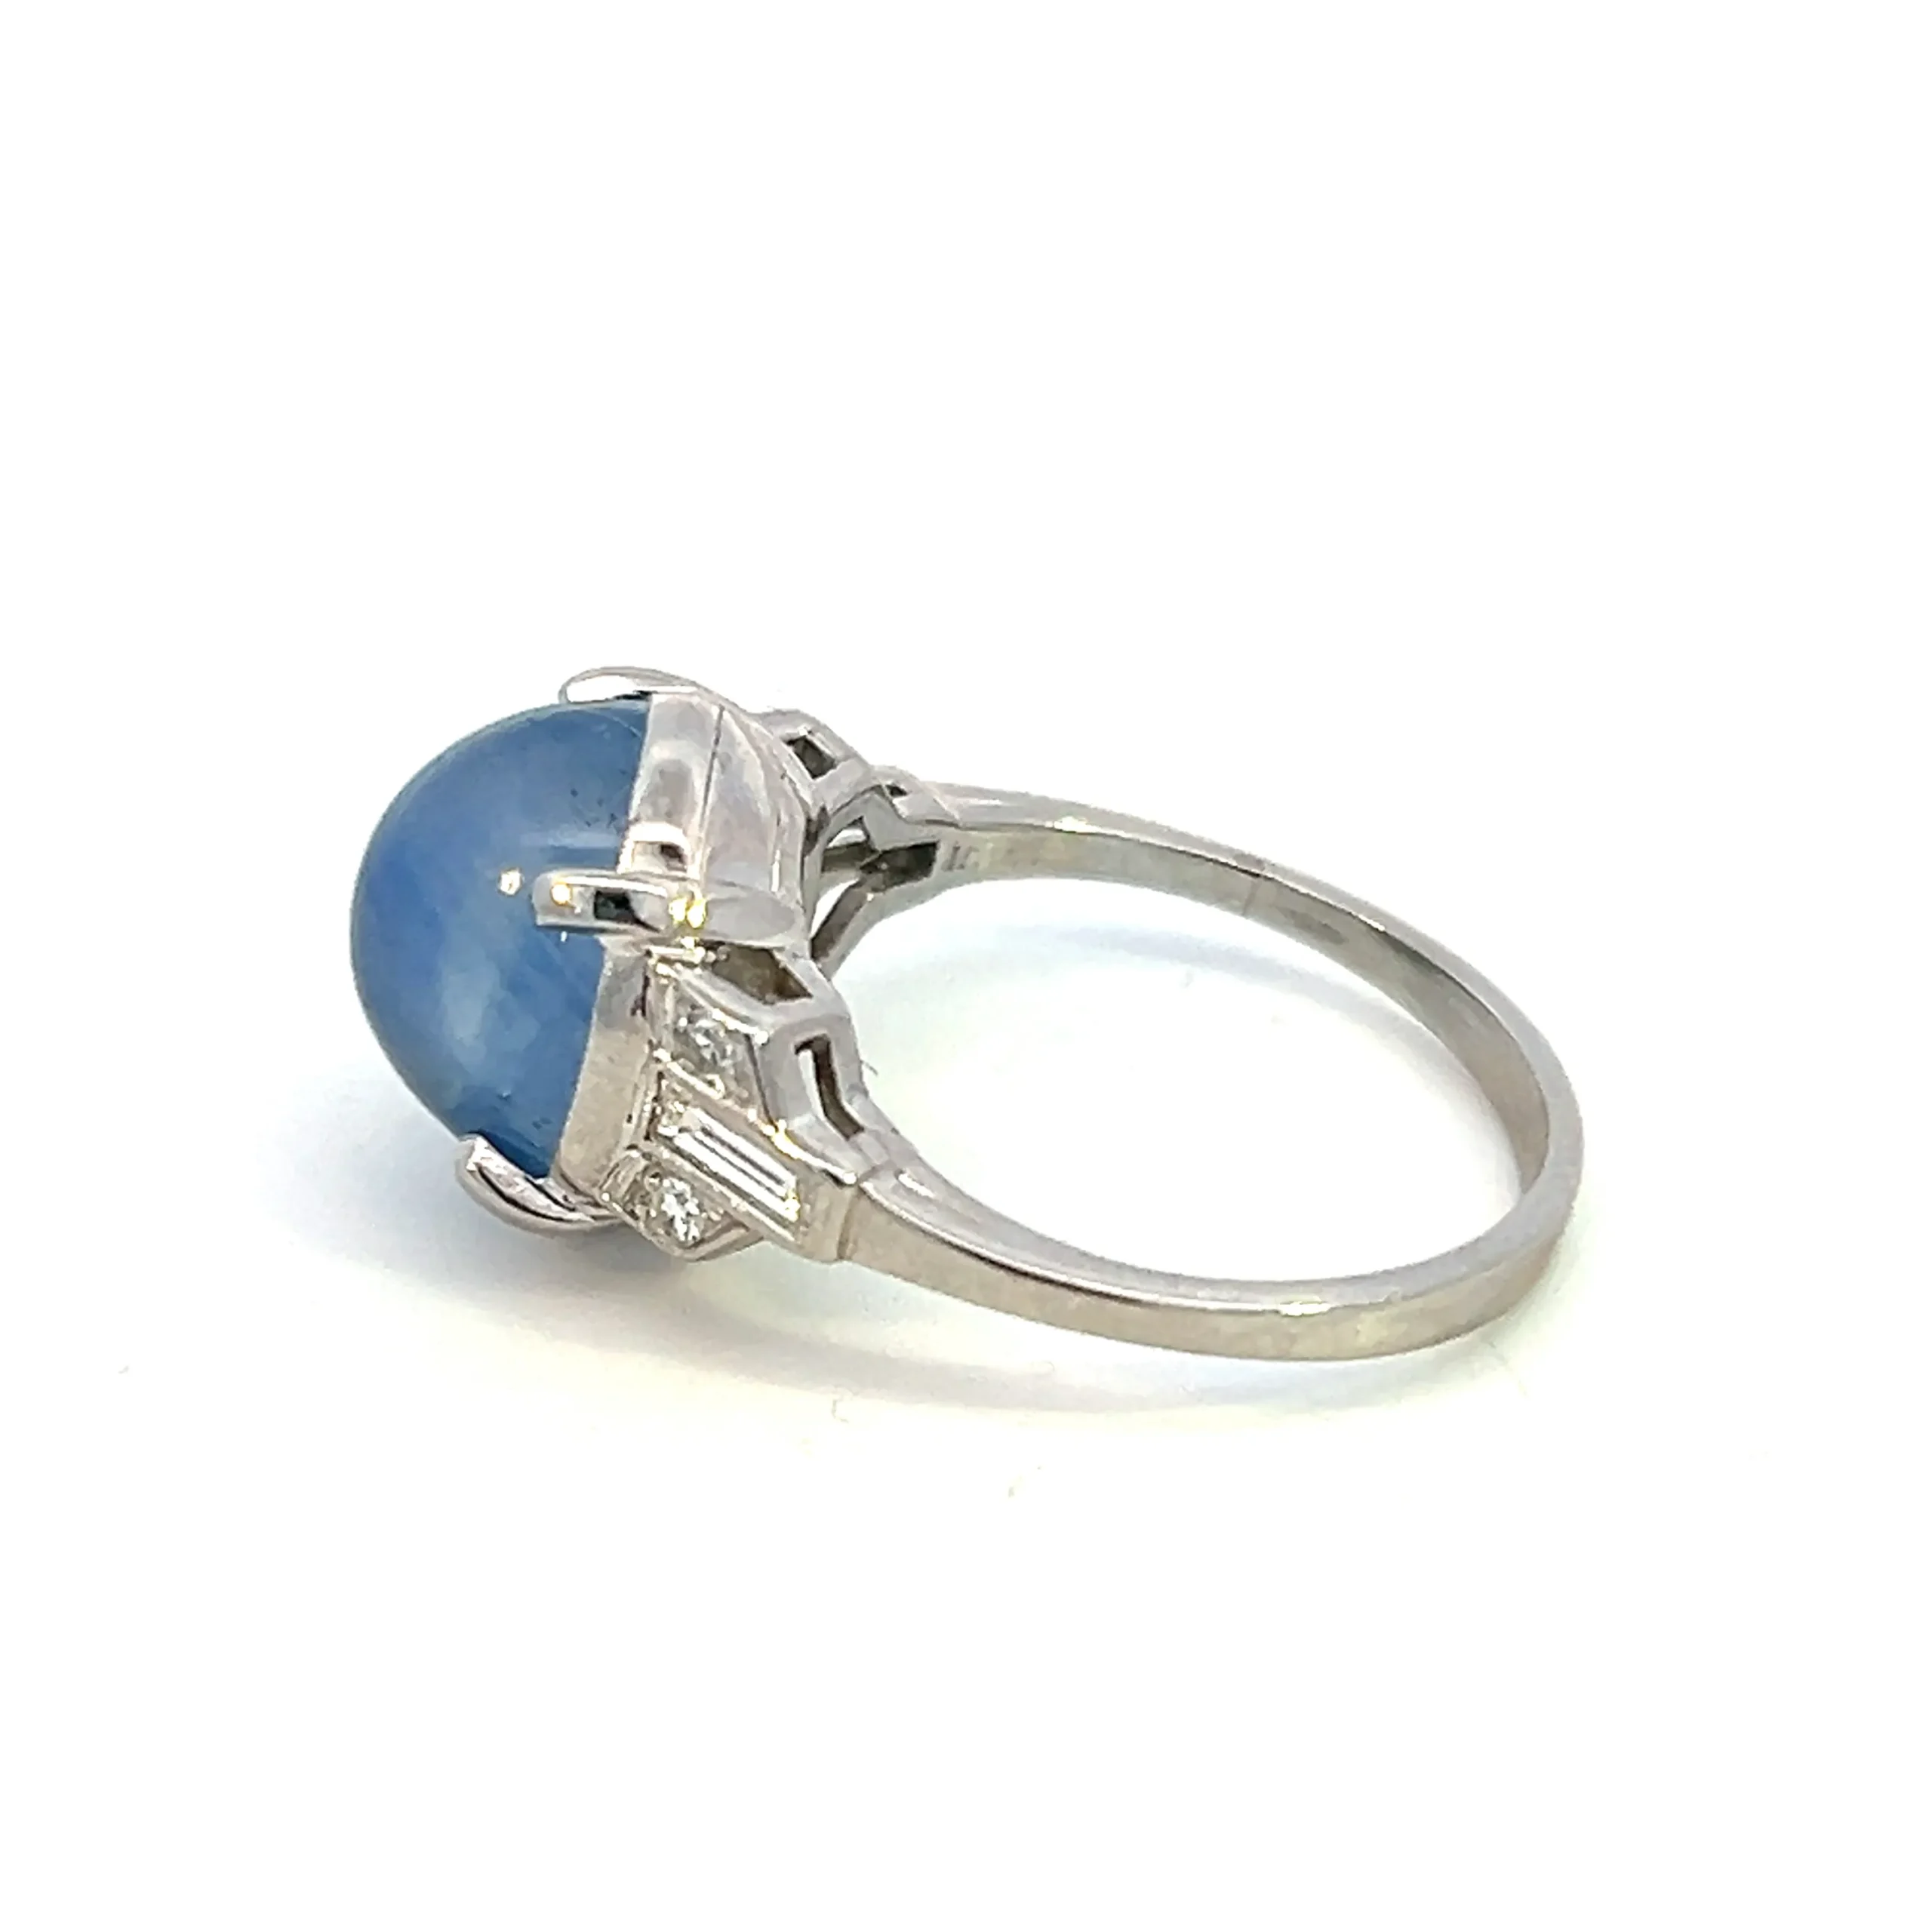 estate platinum ring set with 1 oval cabochon cornflower blur star sapphire weighing 9.62 carats accented on the shoulders with 4 single cut diamonds weighing 0.08 total carat weight and 2 baguette cut diamonds weighing 0.24 total carat weight. The ring is vintage from the 1920s.